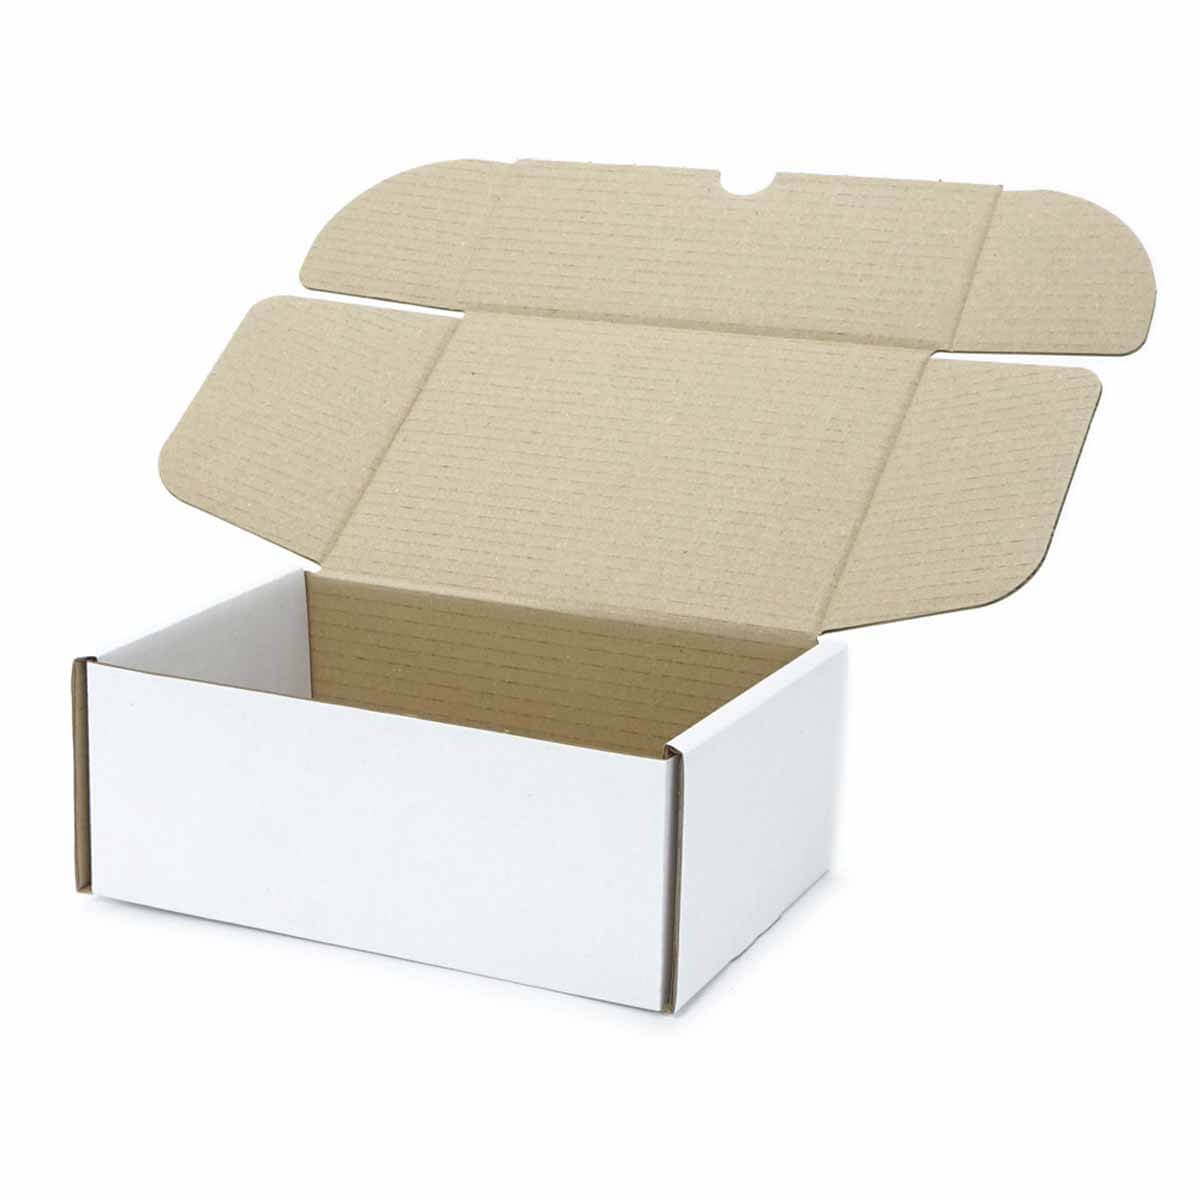 Custom Collapsible Boxes- Where Practicality Meets Personalization